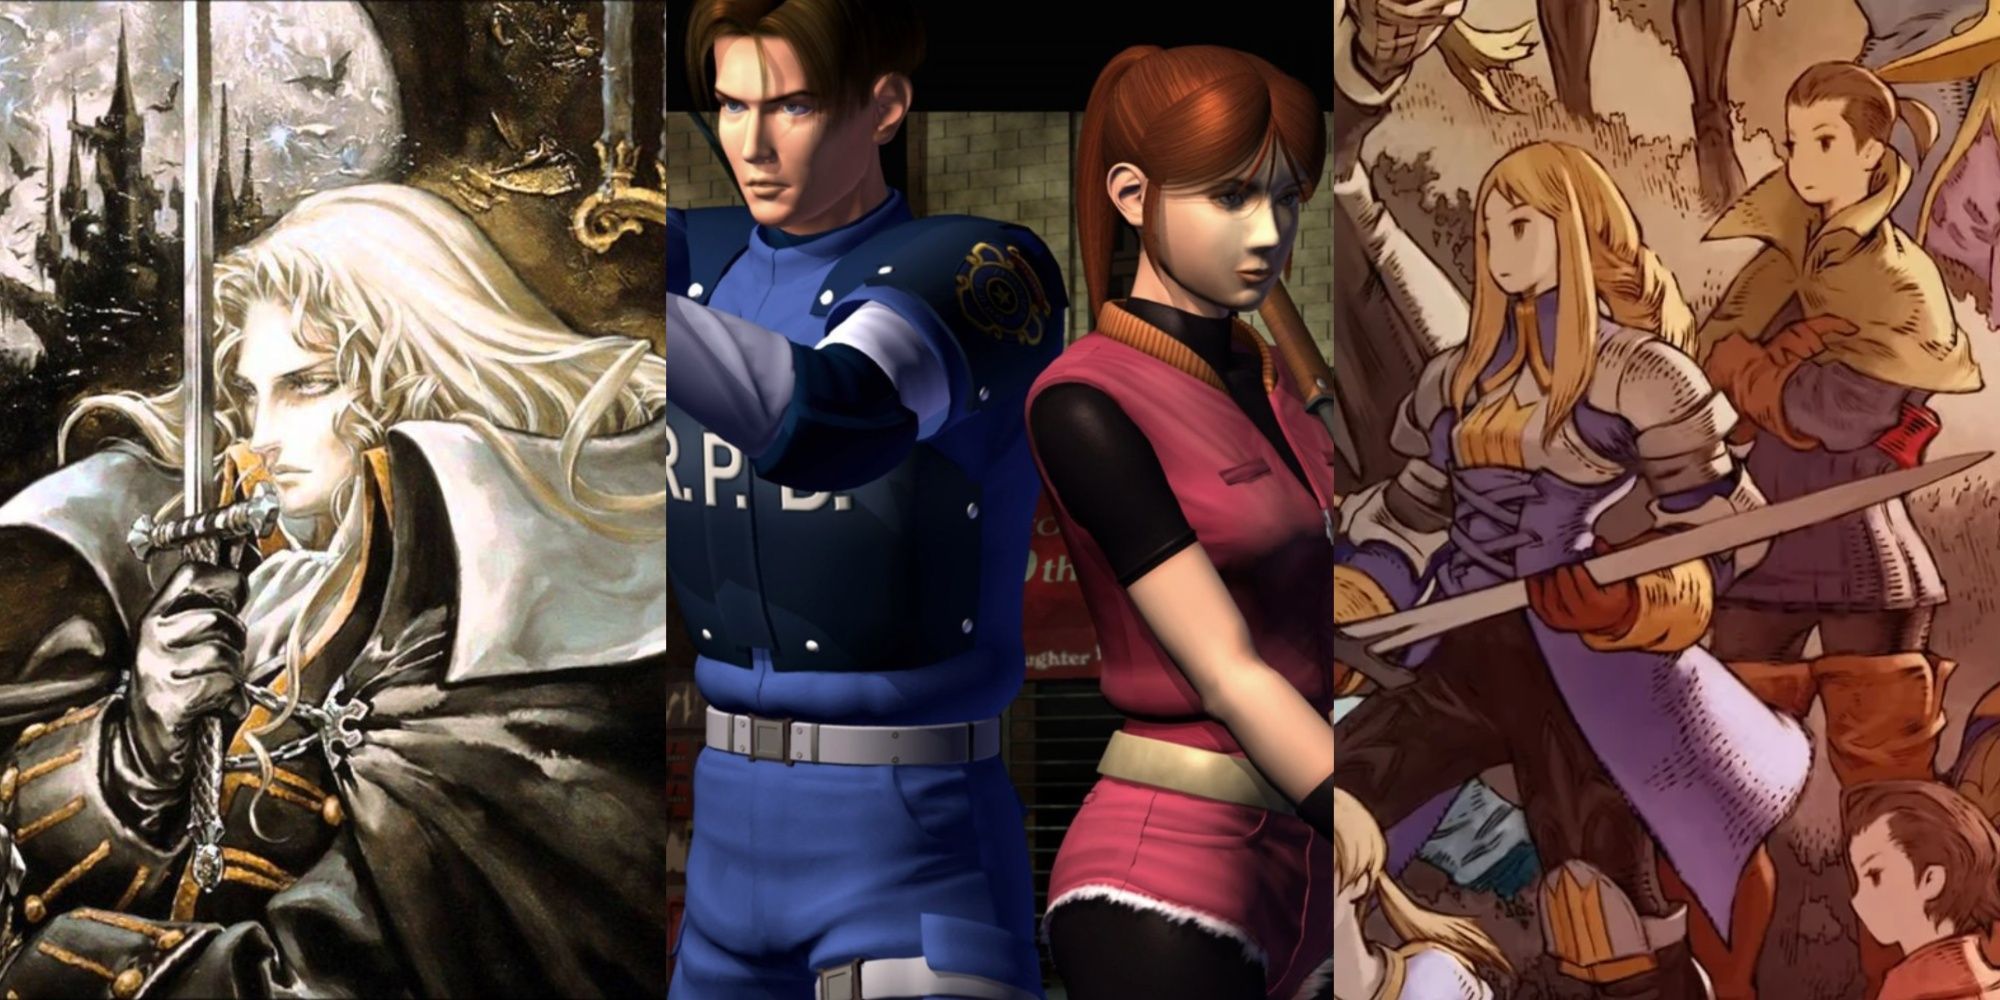 Alucard Castlevania, Leon Kennedy and Claire Redfield Resident Evil, Final fantasy Tactics characters